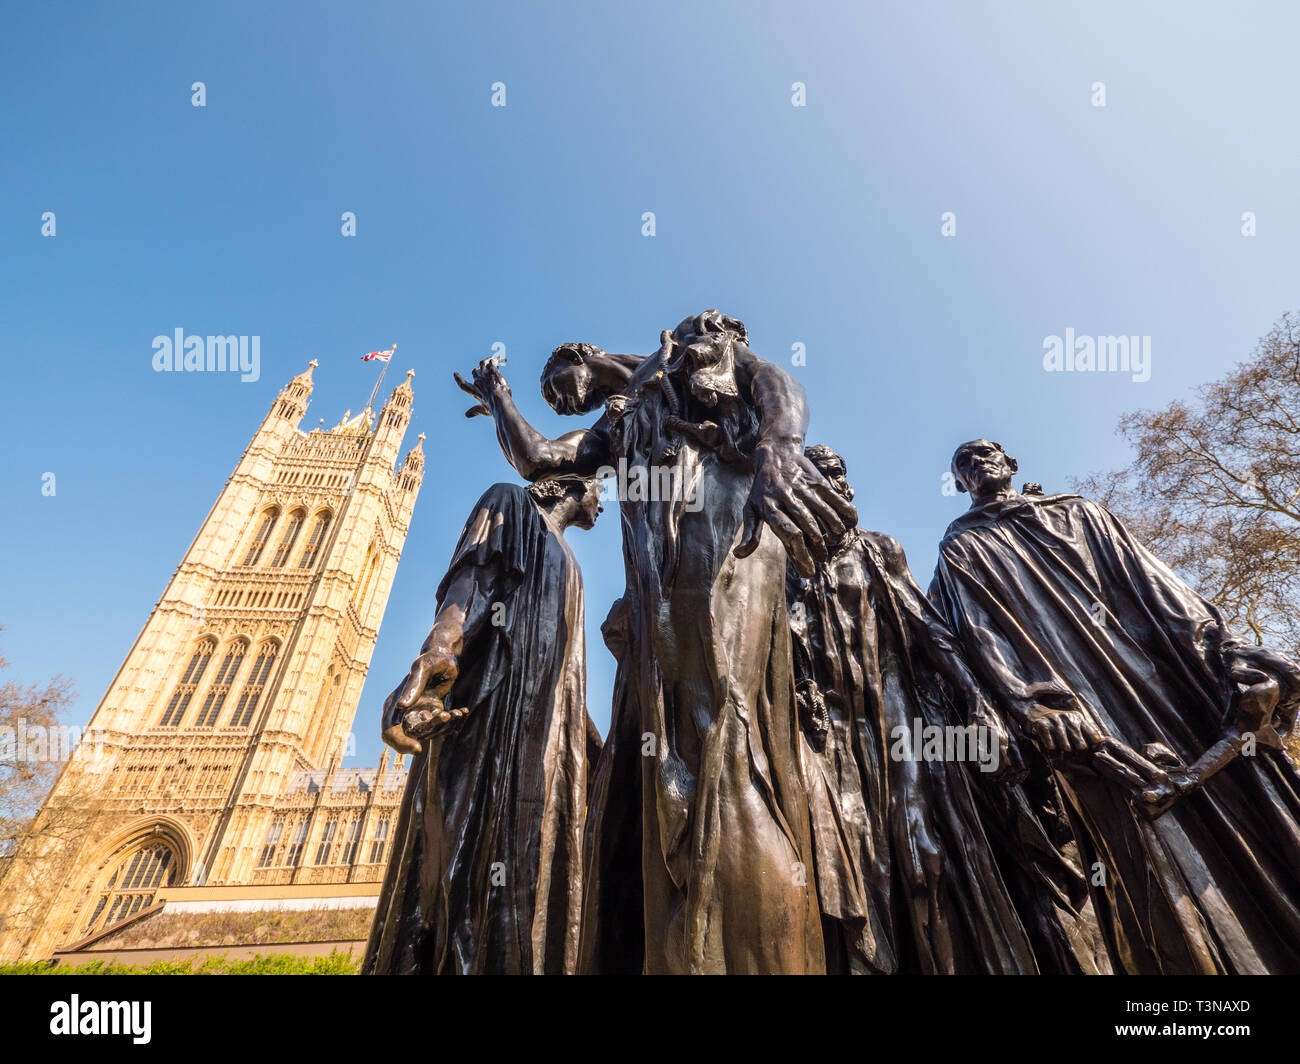 The Burghers of Calais Sculpture, by Auguste Rodin, In Front of Palace of Westminster, London, England, UK, GB. Stock Photo